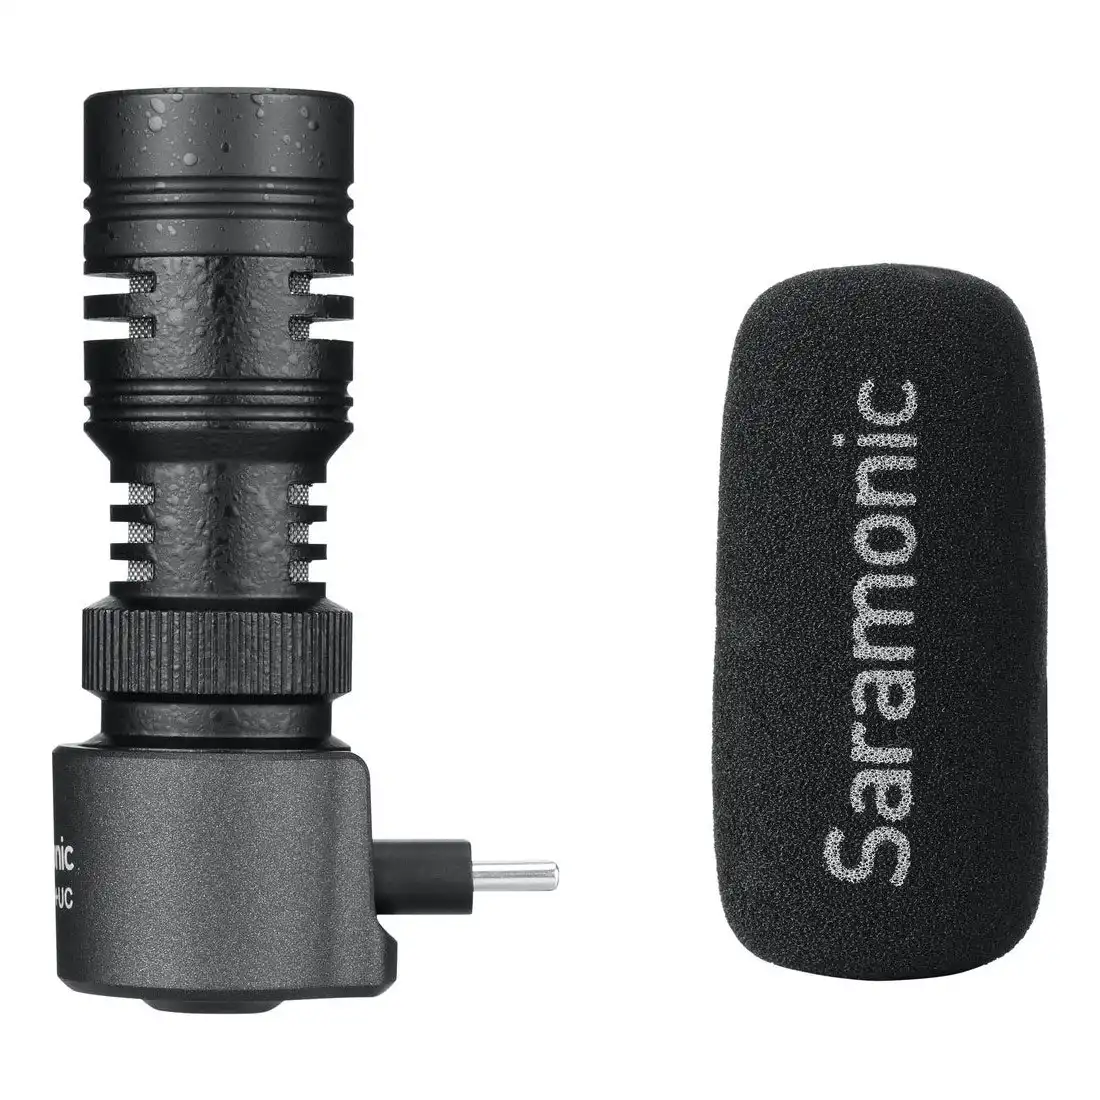 Saramonic SmartMic+ UC Compact Directional Microphone with USB Type-C Plug for Android Mobile Devices